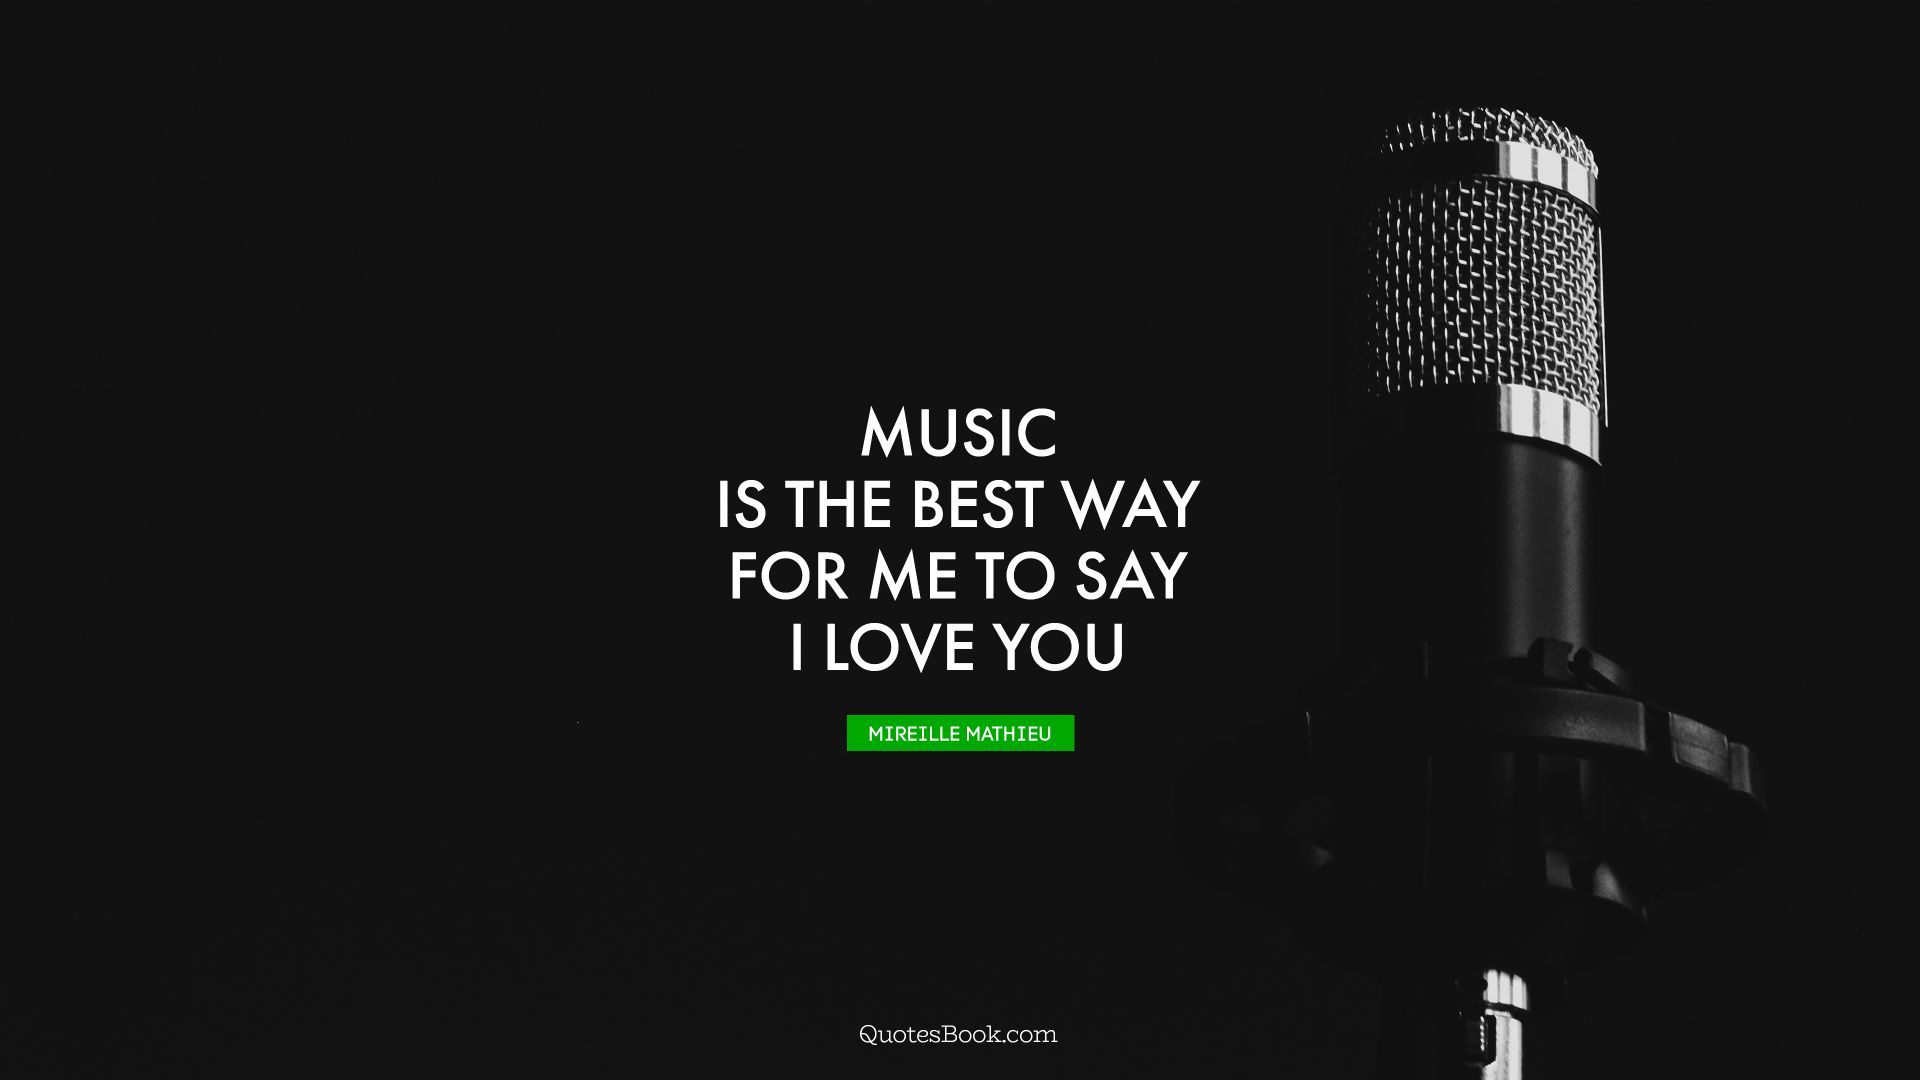 Music is the best way for me to say I love you. - Quote by Mireille Mathieu